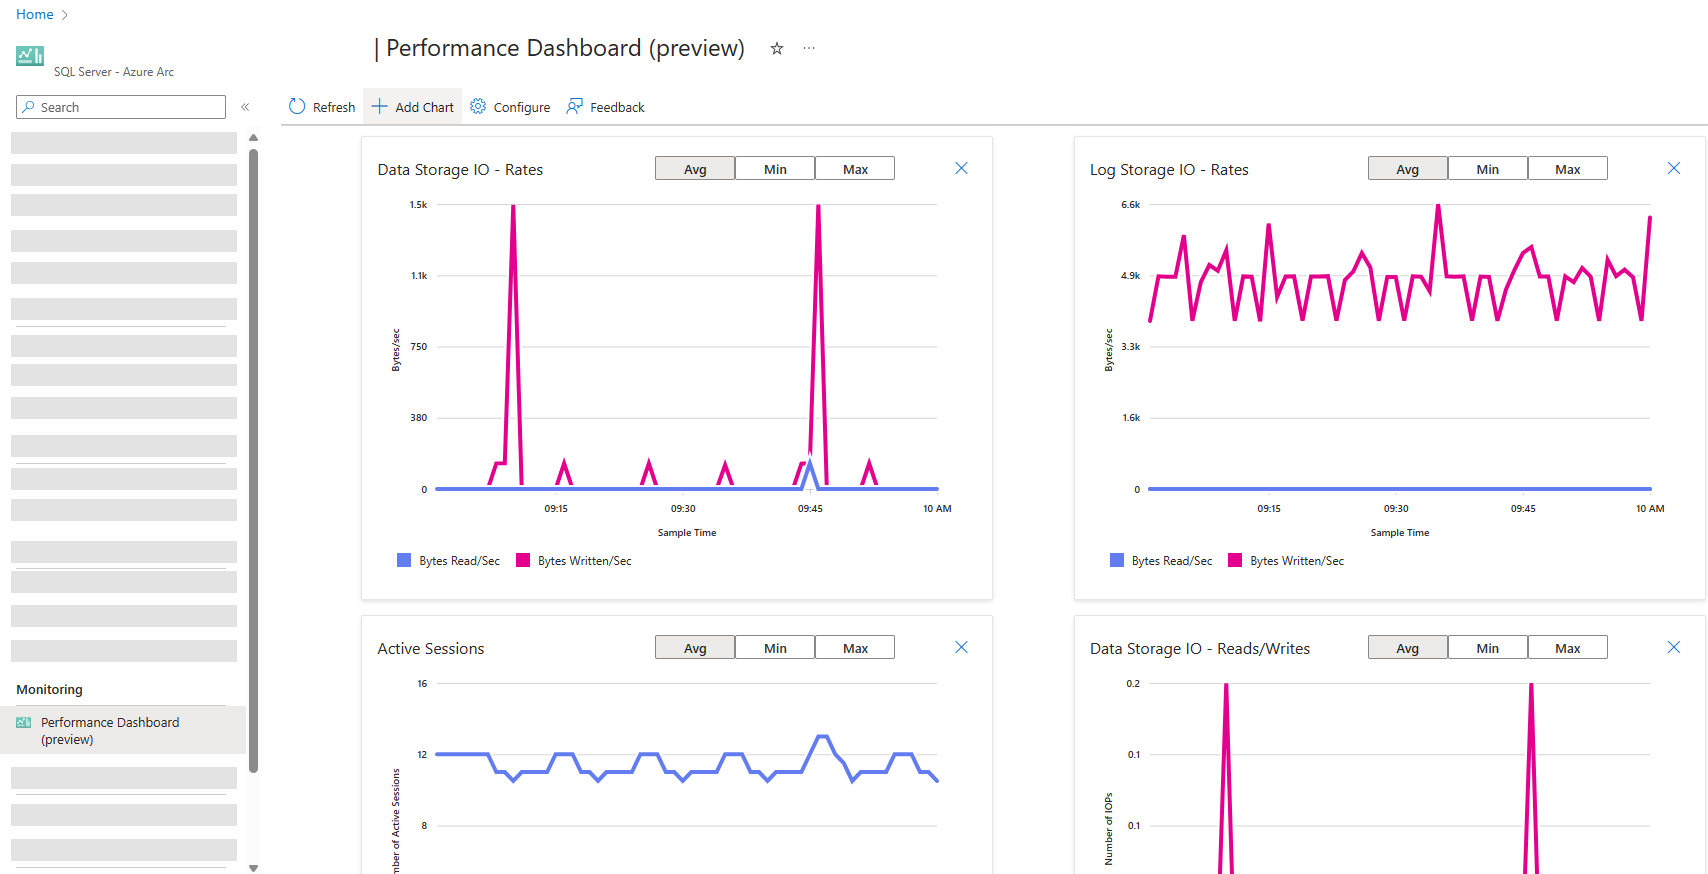 Screenshot of performance dashboard for SQL Server enabled by Azure Arc.